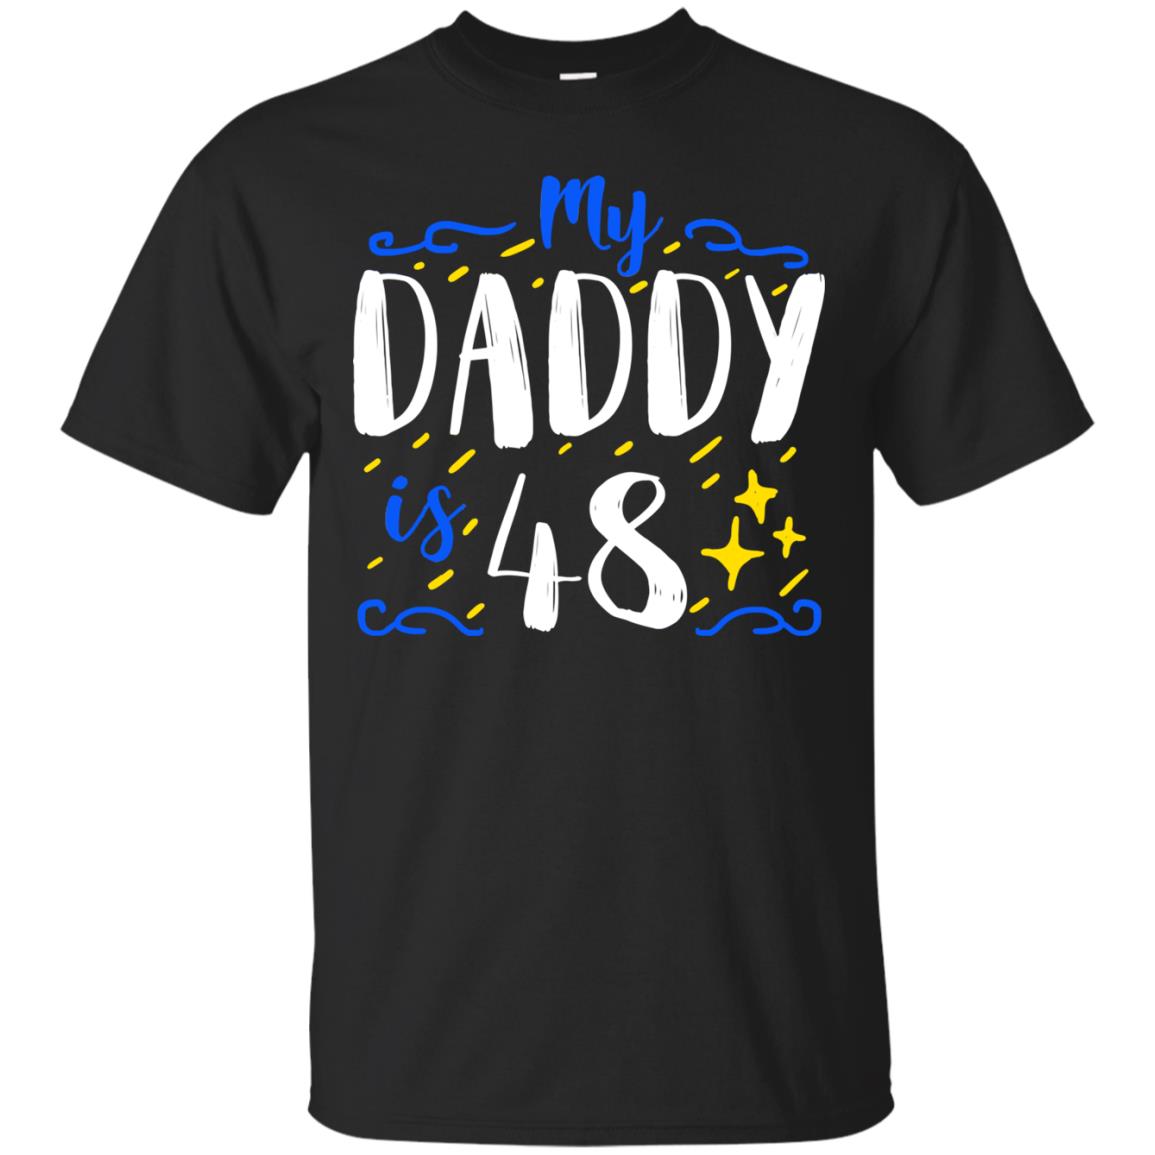 My Daddy Is 48 48th Birthday Daddy Shirt For Sons Or DaughtersG200 Gildan Ultra Cotton T-Shirt